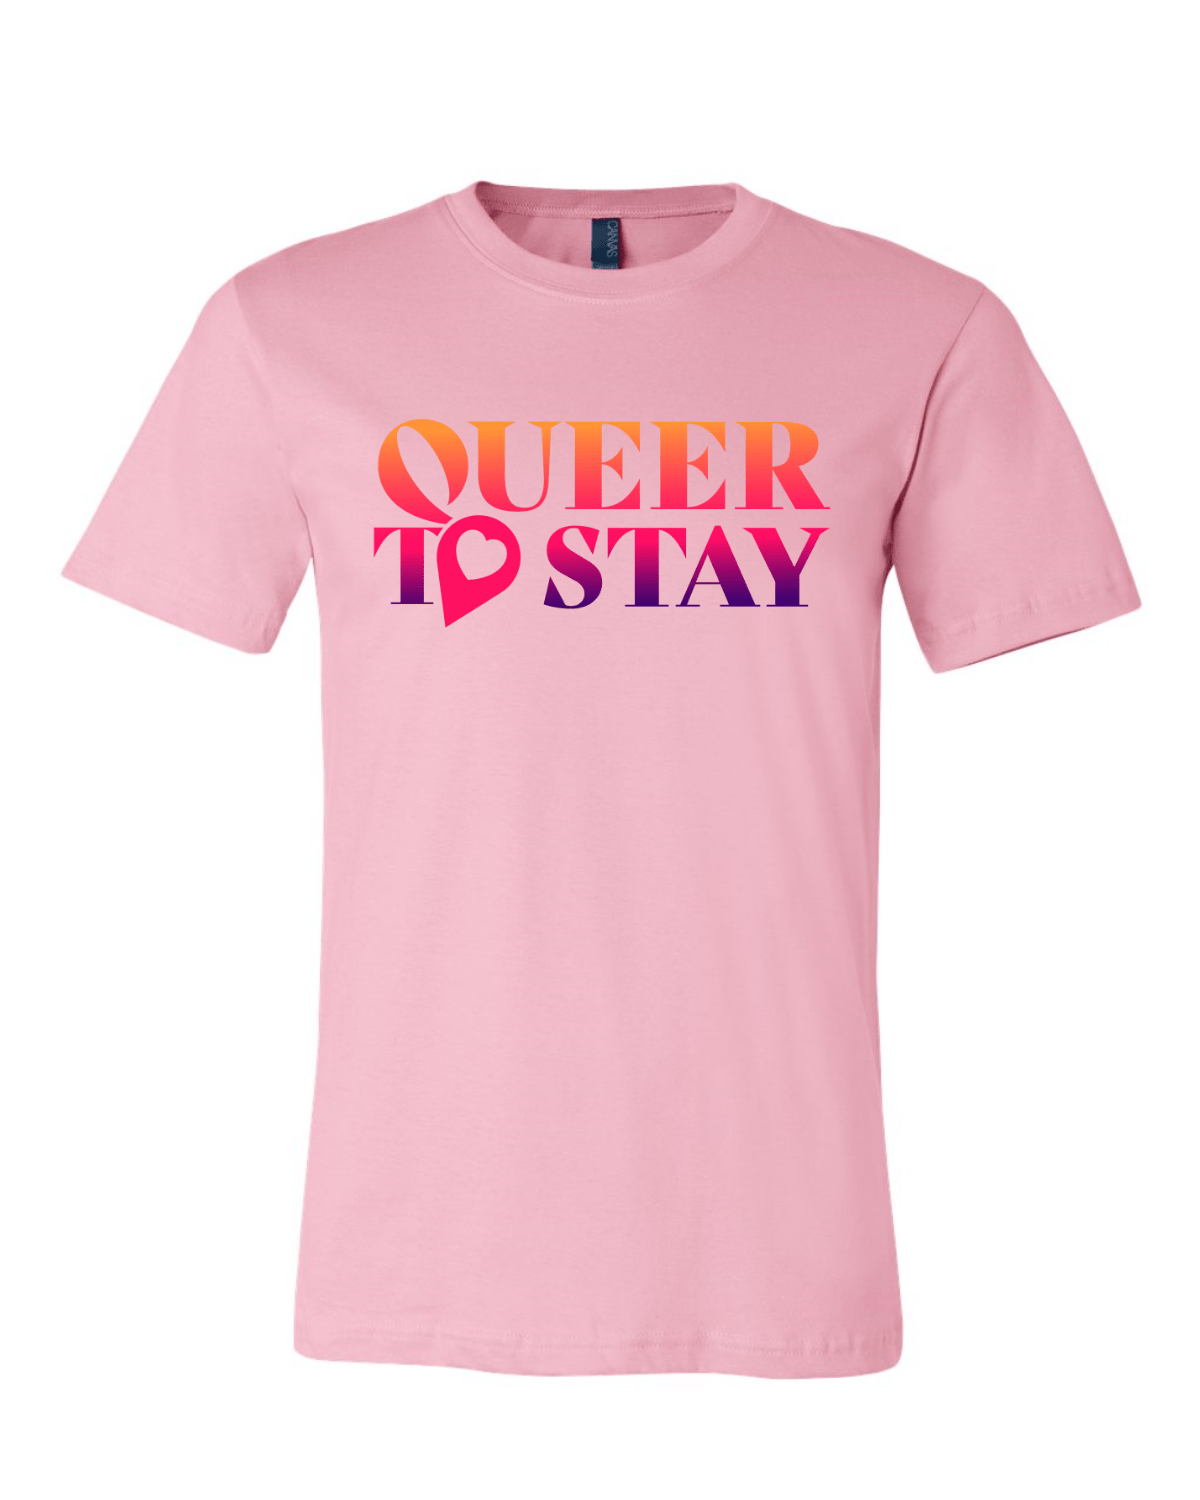 SHOWTIME Queer to Stay Adult Short Sleeve T - Shirt - Paramount Shop